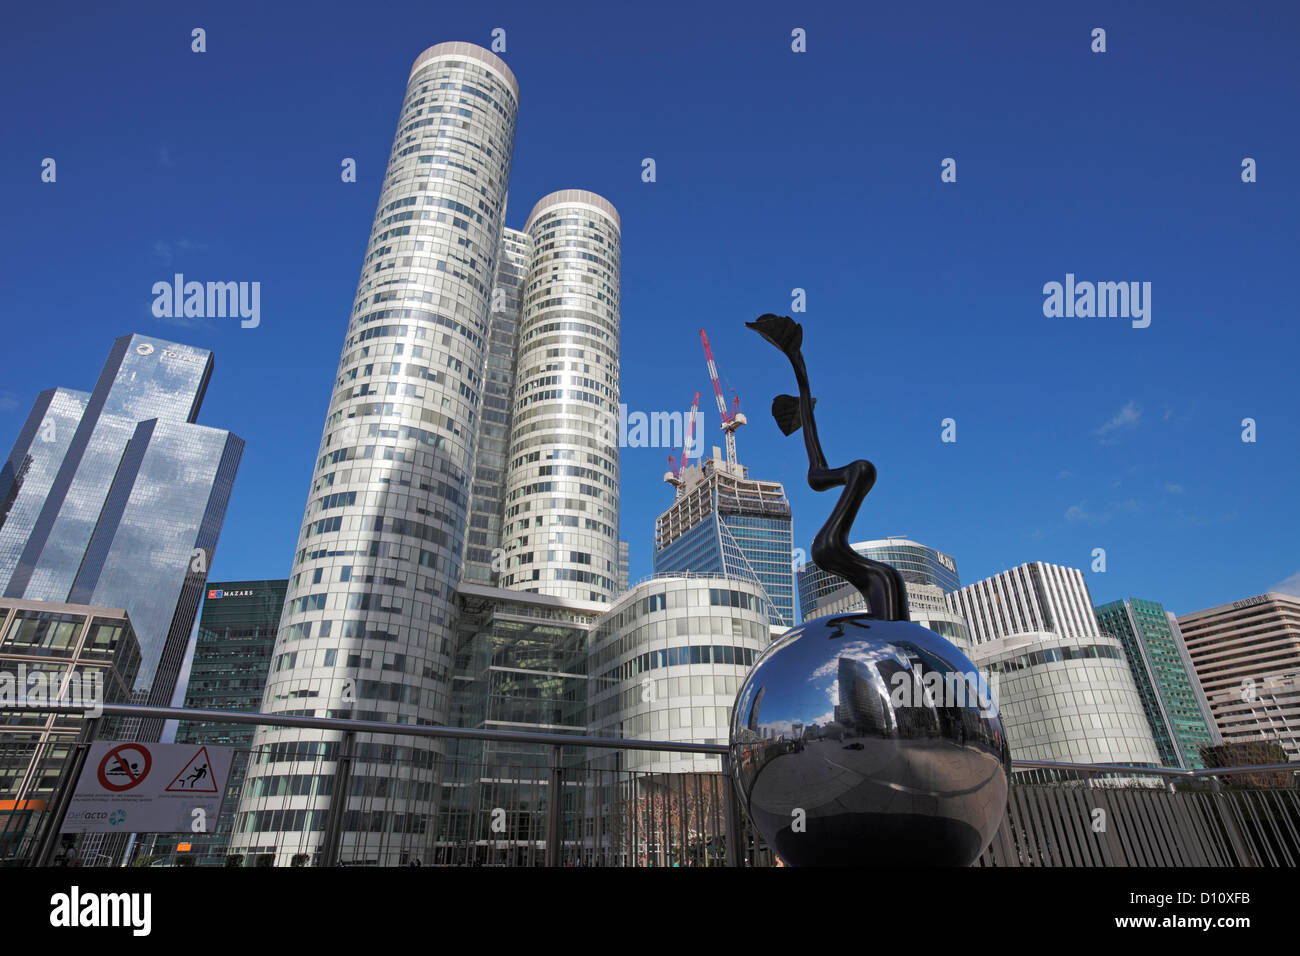 Tower Coeur Défense and headquarters of Total and the sculpture of Lim Dong-Lak in La Défense in Paris (Puteaux) Stock Photo